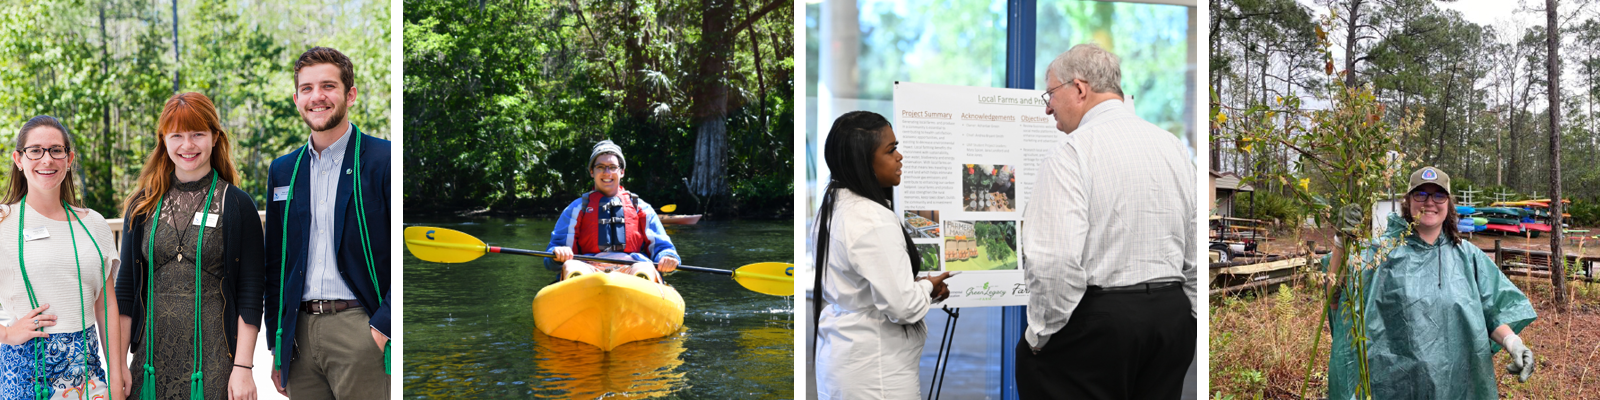 students standing outside, a student kayaking, a student discussing poster with attendee, and student holding large weed